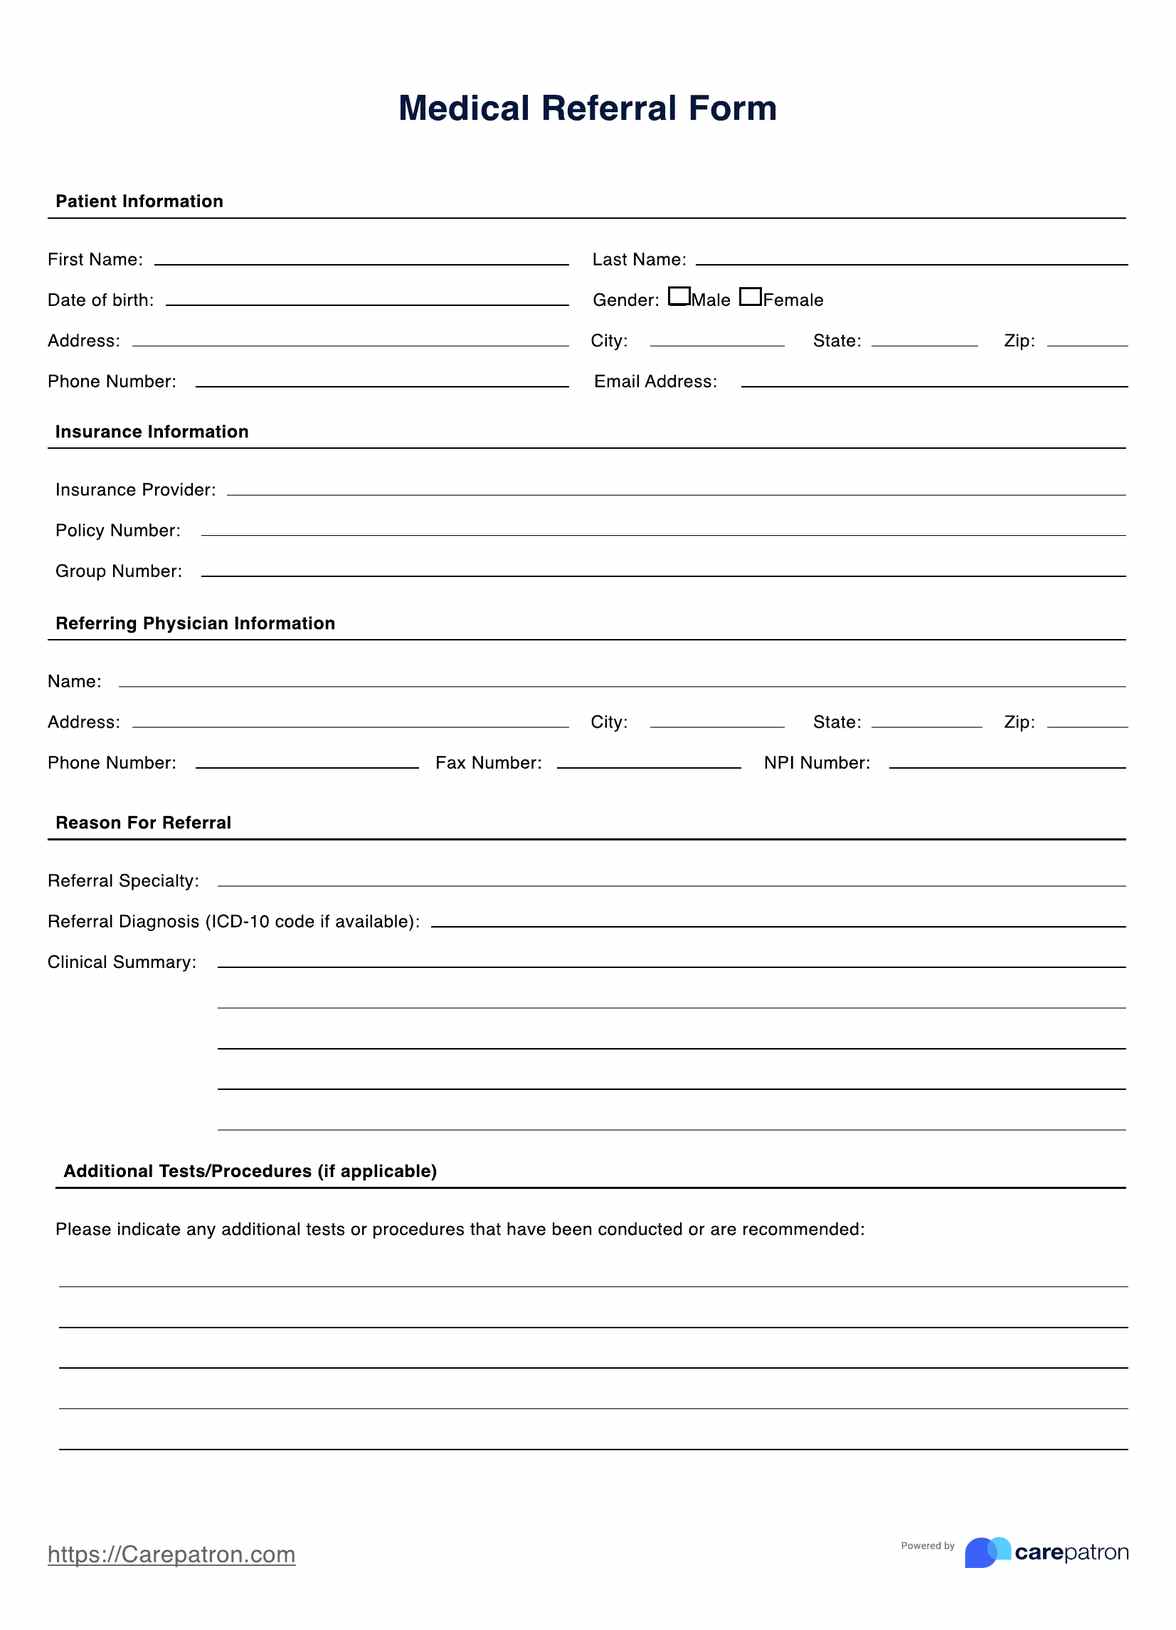 Referral Form PDF Example